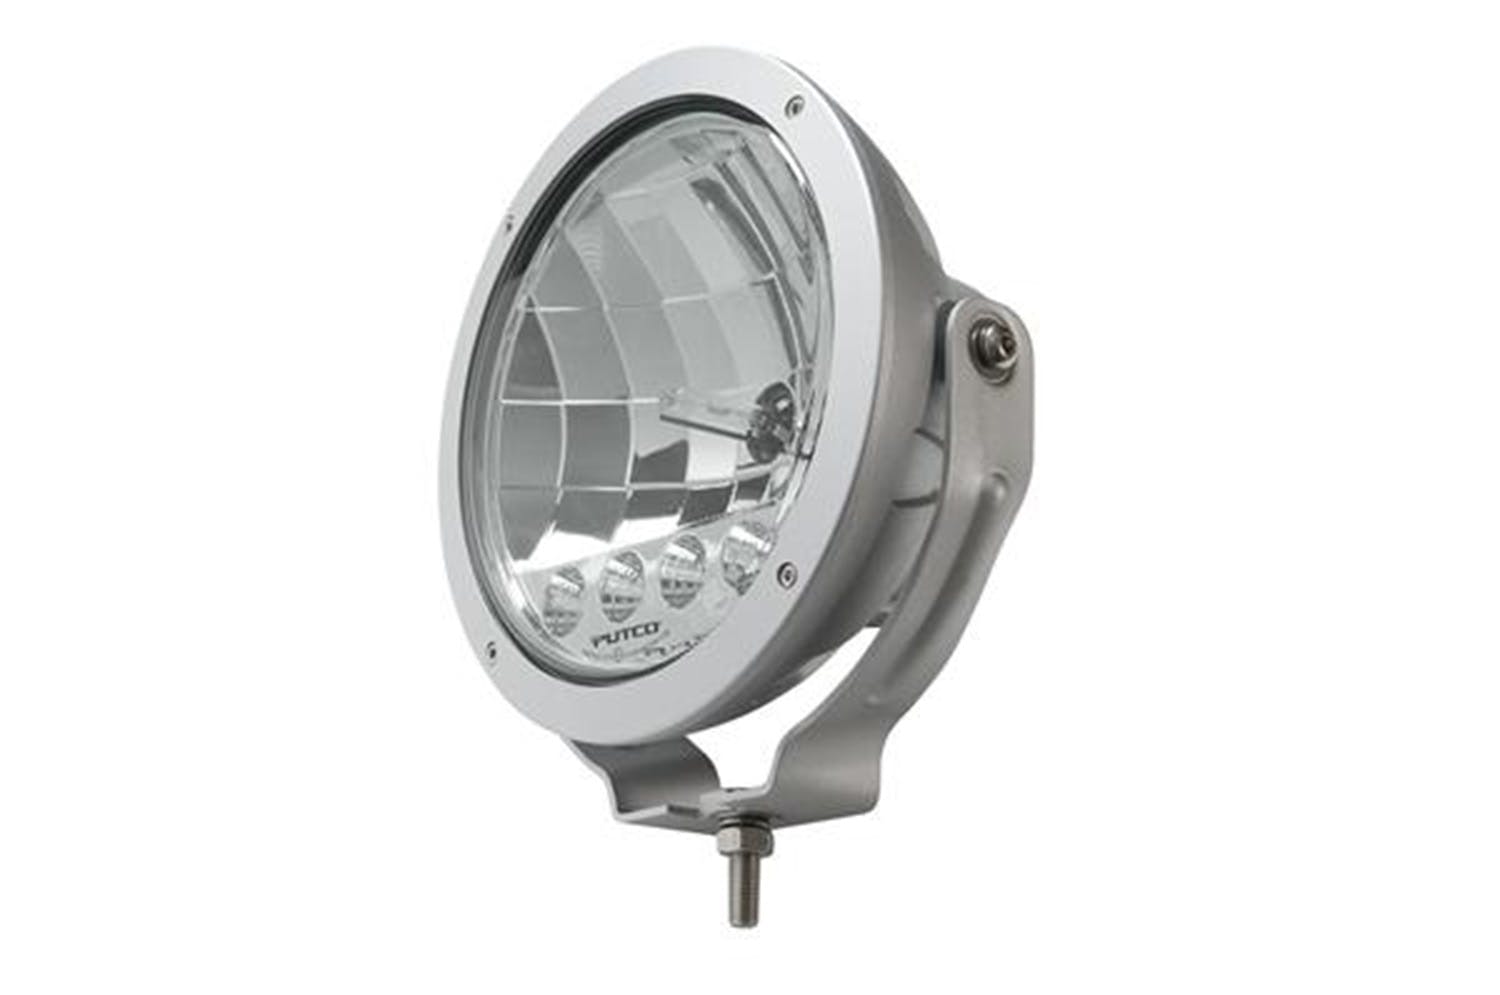 Putco 231900 HID Lamp w/3 LED Daytime Running Lights - 6 inch Silver Housing with Clear Lens